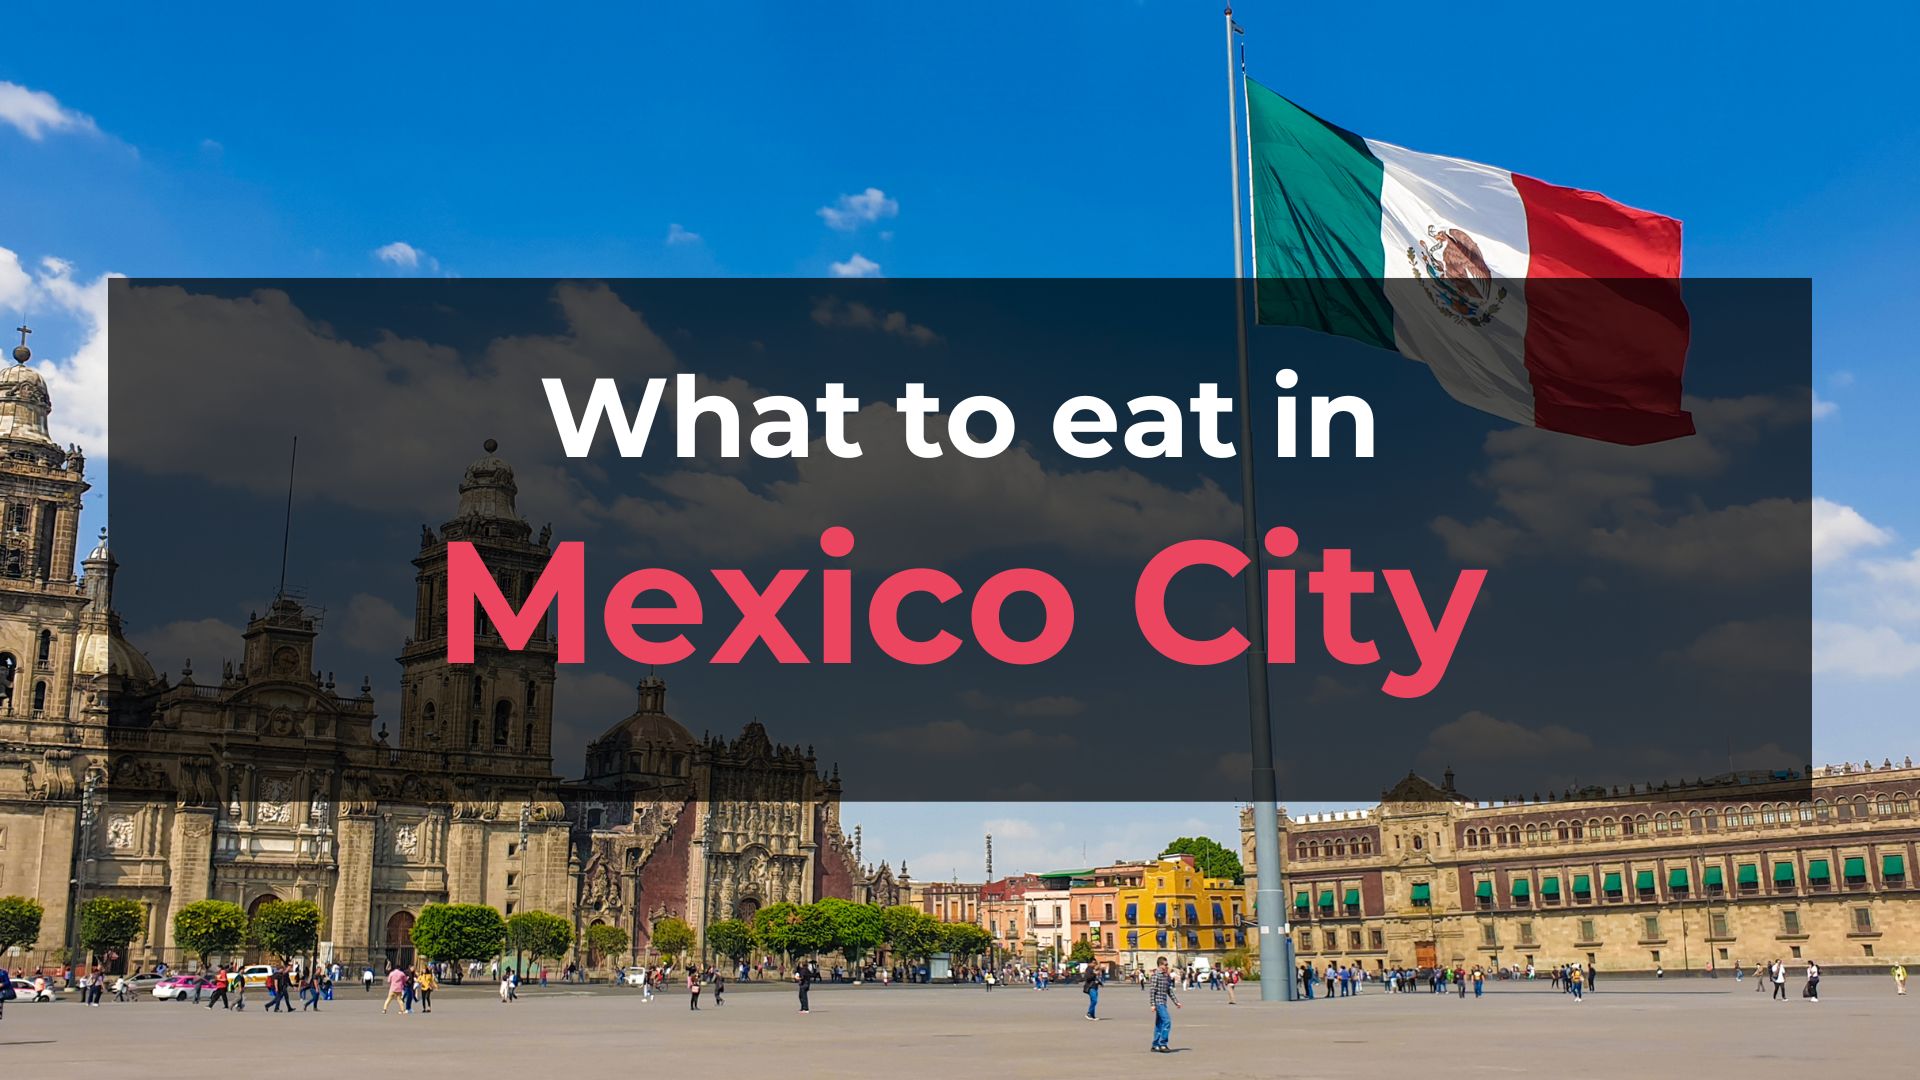 Read more about the article What to Eat in Mexico City: 10 Foods You Should Try